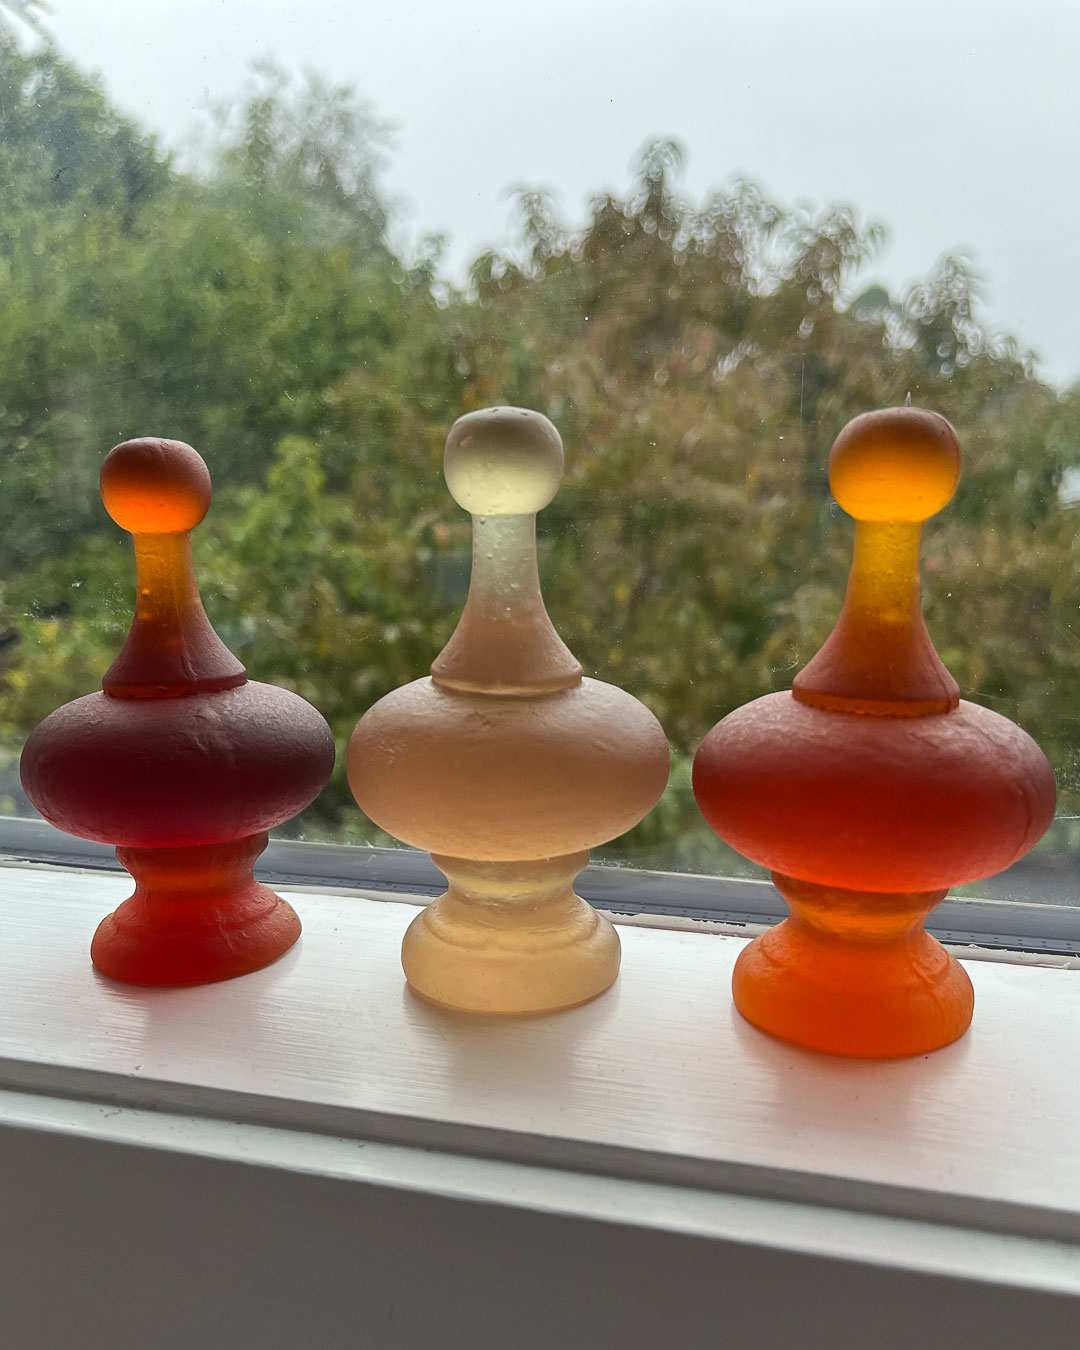 A group of three cast glass finials on a window sill in Dark Orange, Orange and Rhubarb. They form wonderful light-filled installations in groups.